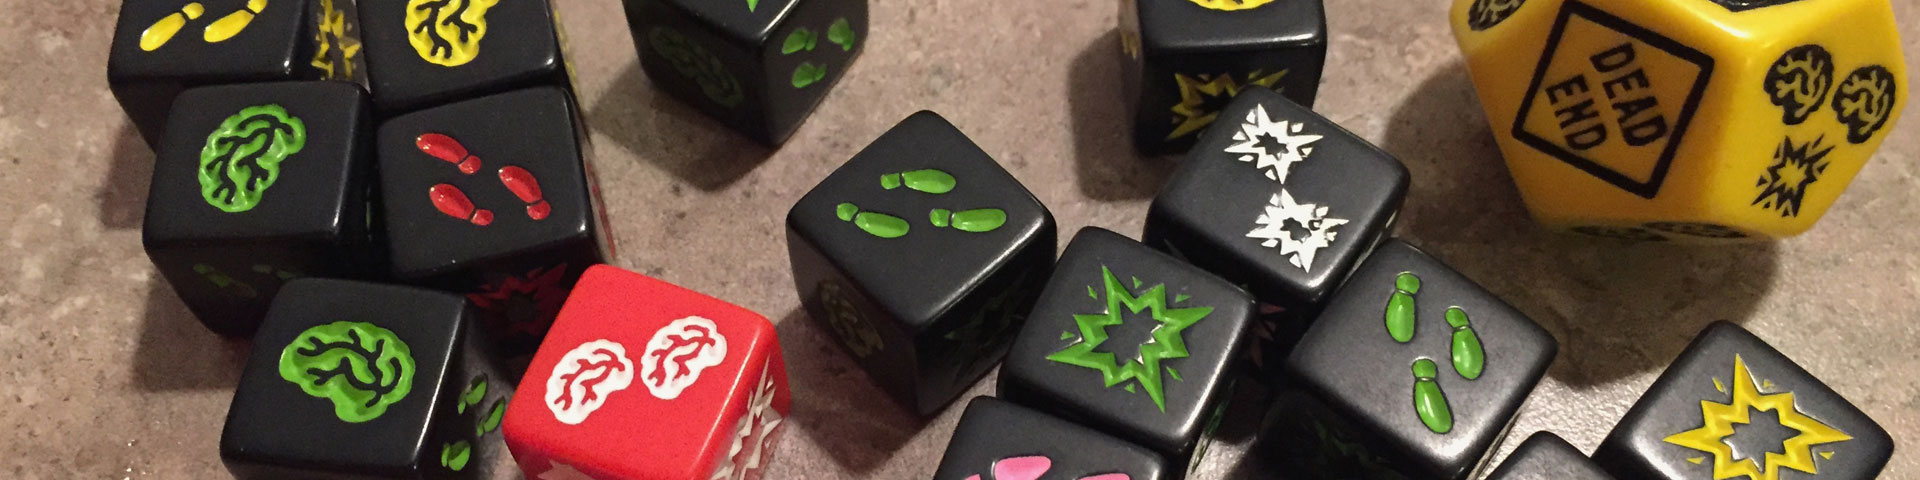 Black and red dice feature one of three symbols: brains, footprints, or shotgun blast. A larger yellow die has "dead end" printed on it.